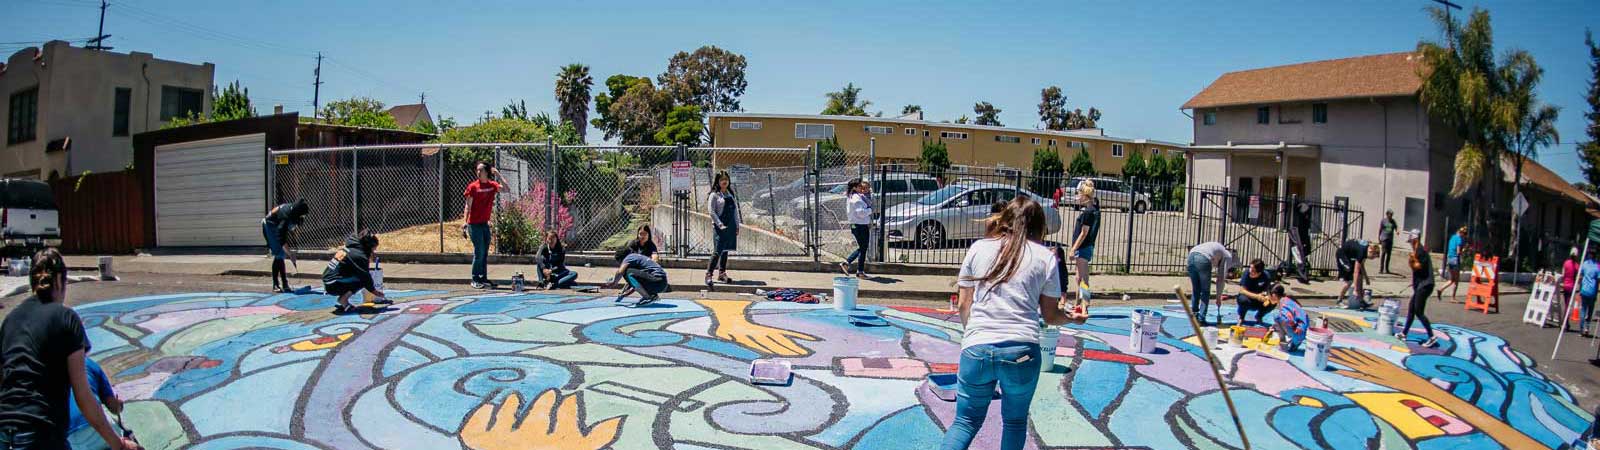 Oakland Fund for Public Innovation-Project Spotlight-City of Oakland-Paint the Town